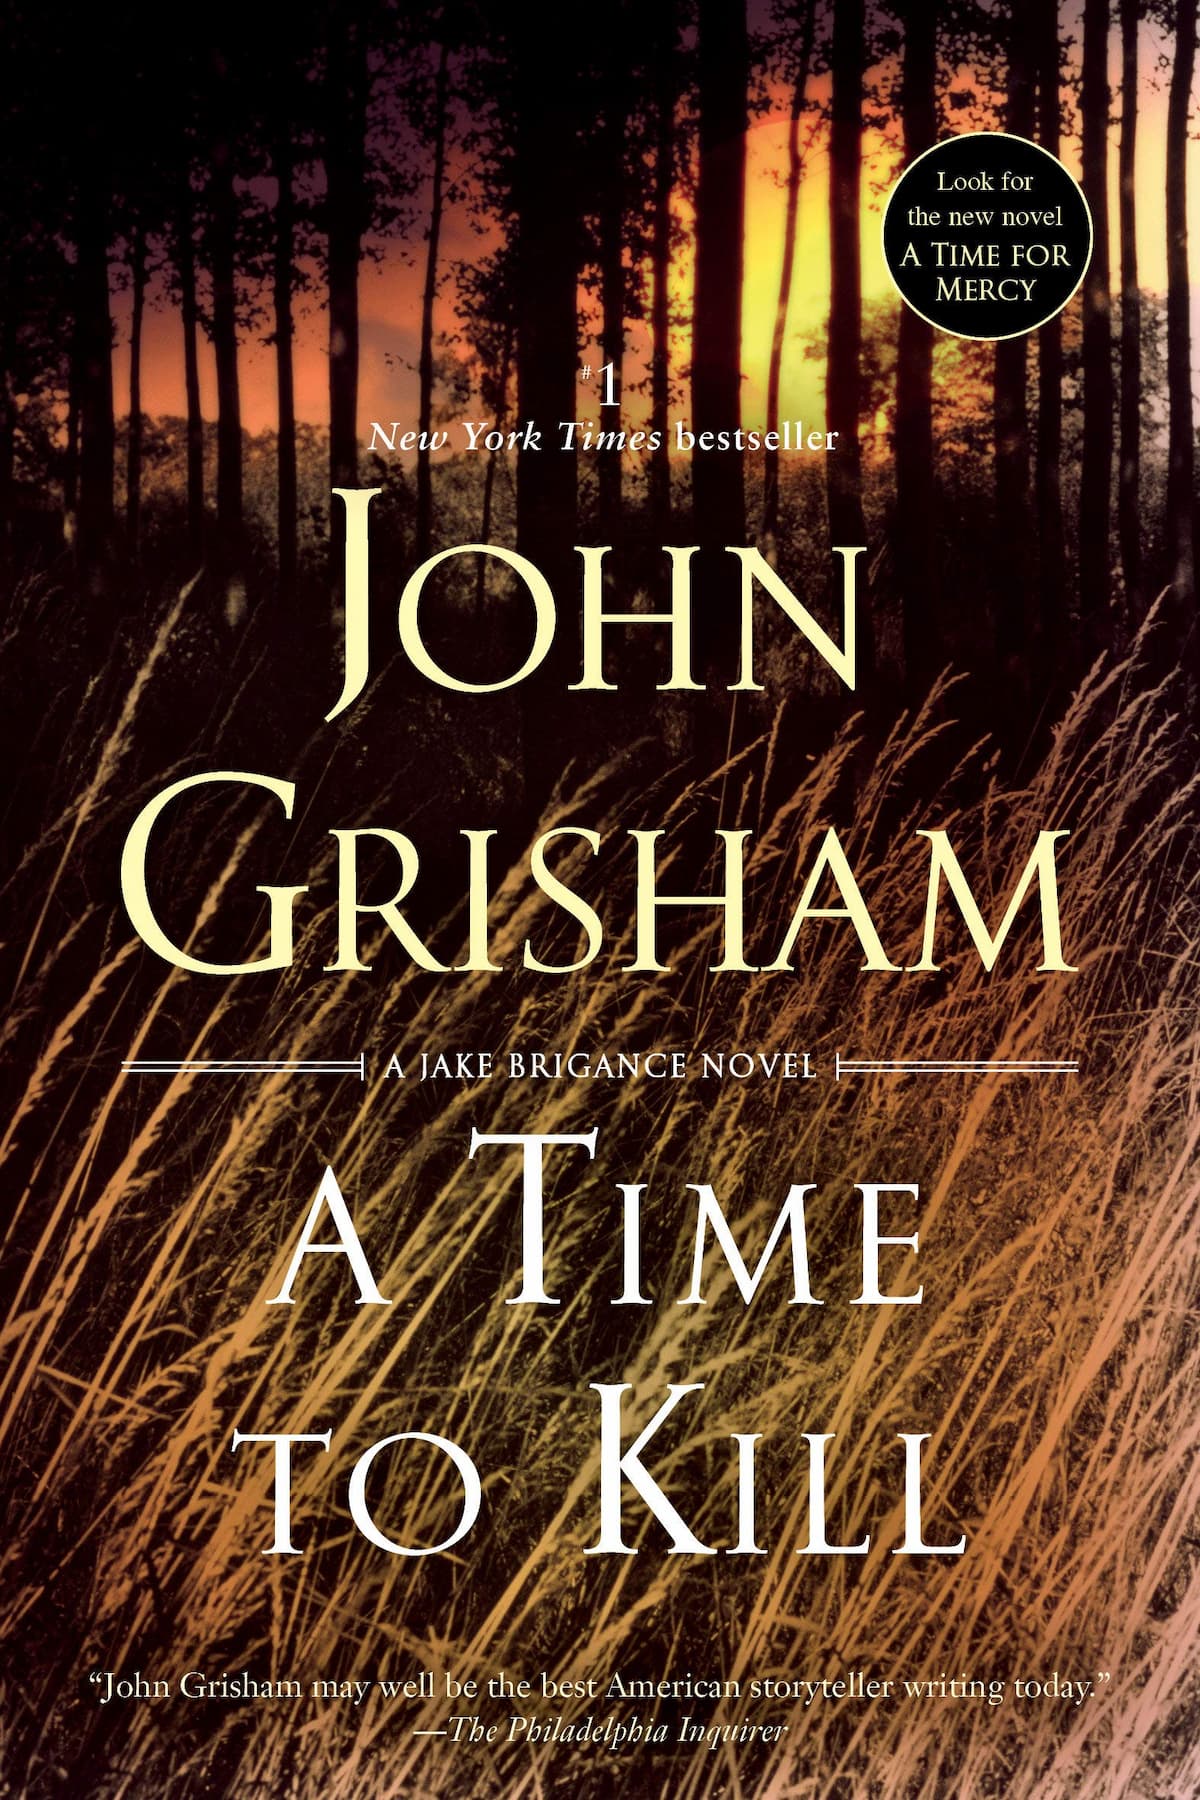 A Time to Kill - John Grisham (Jake Brigance Series Book 1), Bestsellers, Crime Fiction and Mysteries, Fiction, Jake Brigance Books In Order, Jake Brigance Series, John Grisham Books In Order, Legal Thrillers, Noteworthy, Thrillers